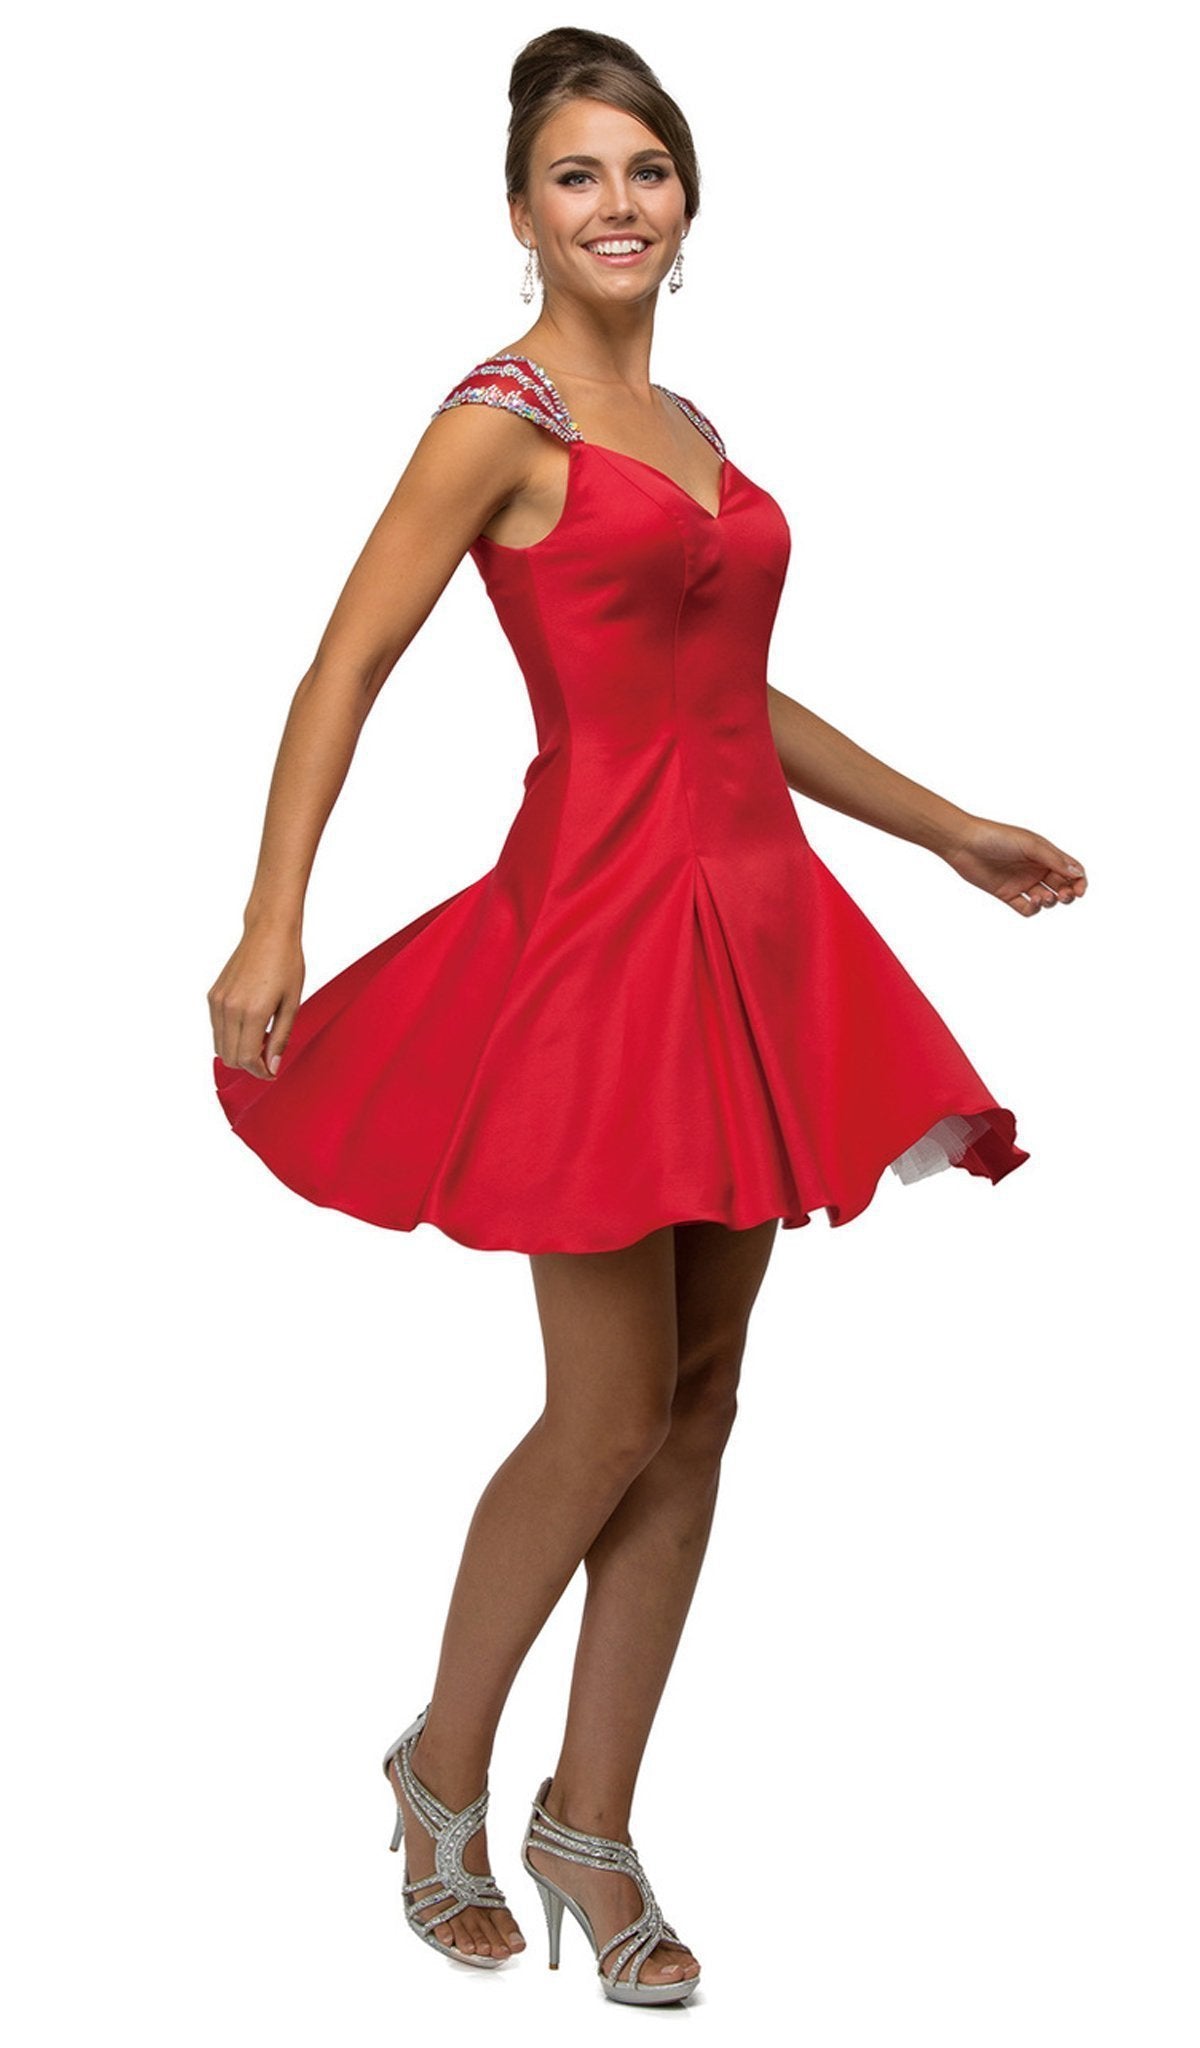 Dancing Queen - 9476 Jeweled Cap Sleeve Sweetheart Satin Cocktail Dress Cocktail Dresses XS / Red